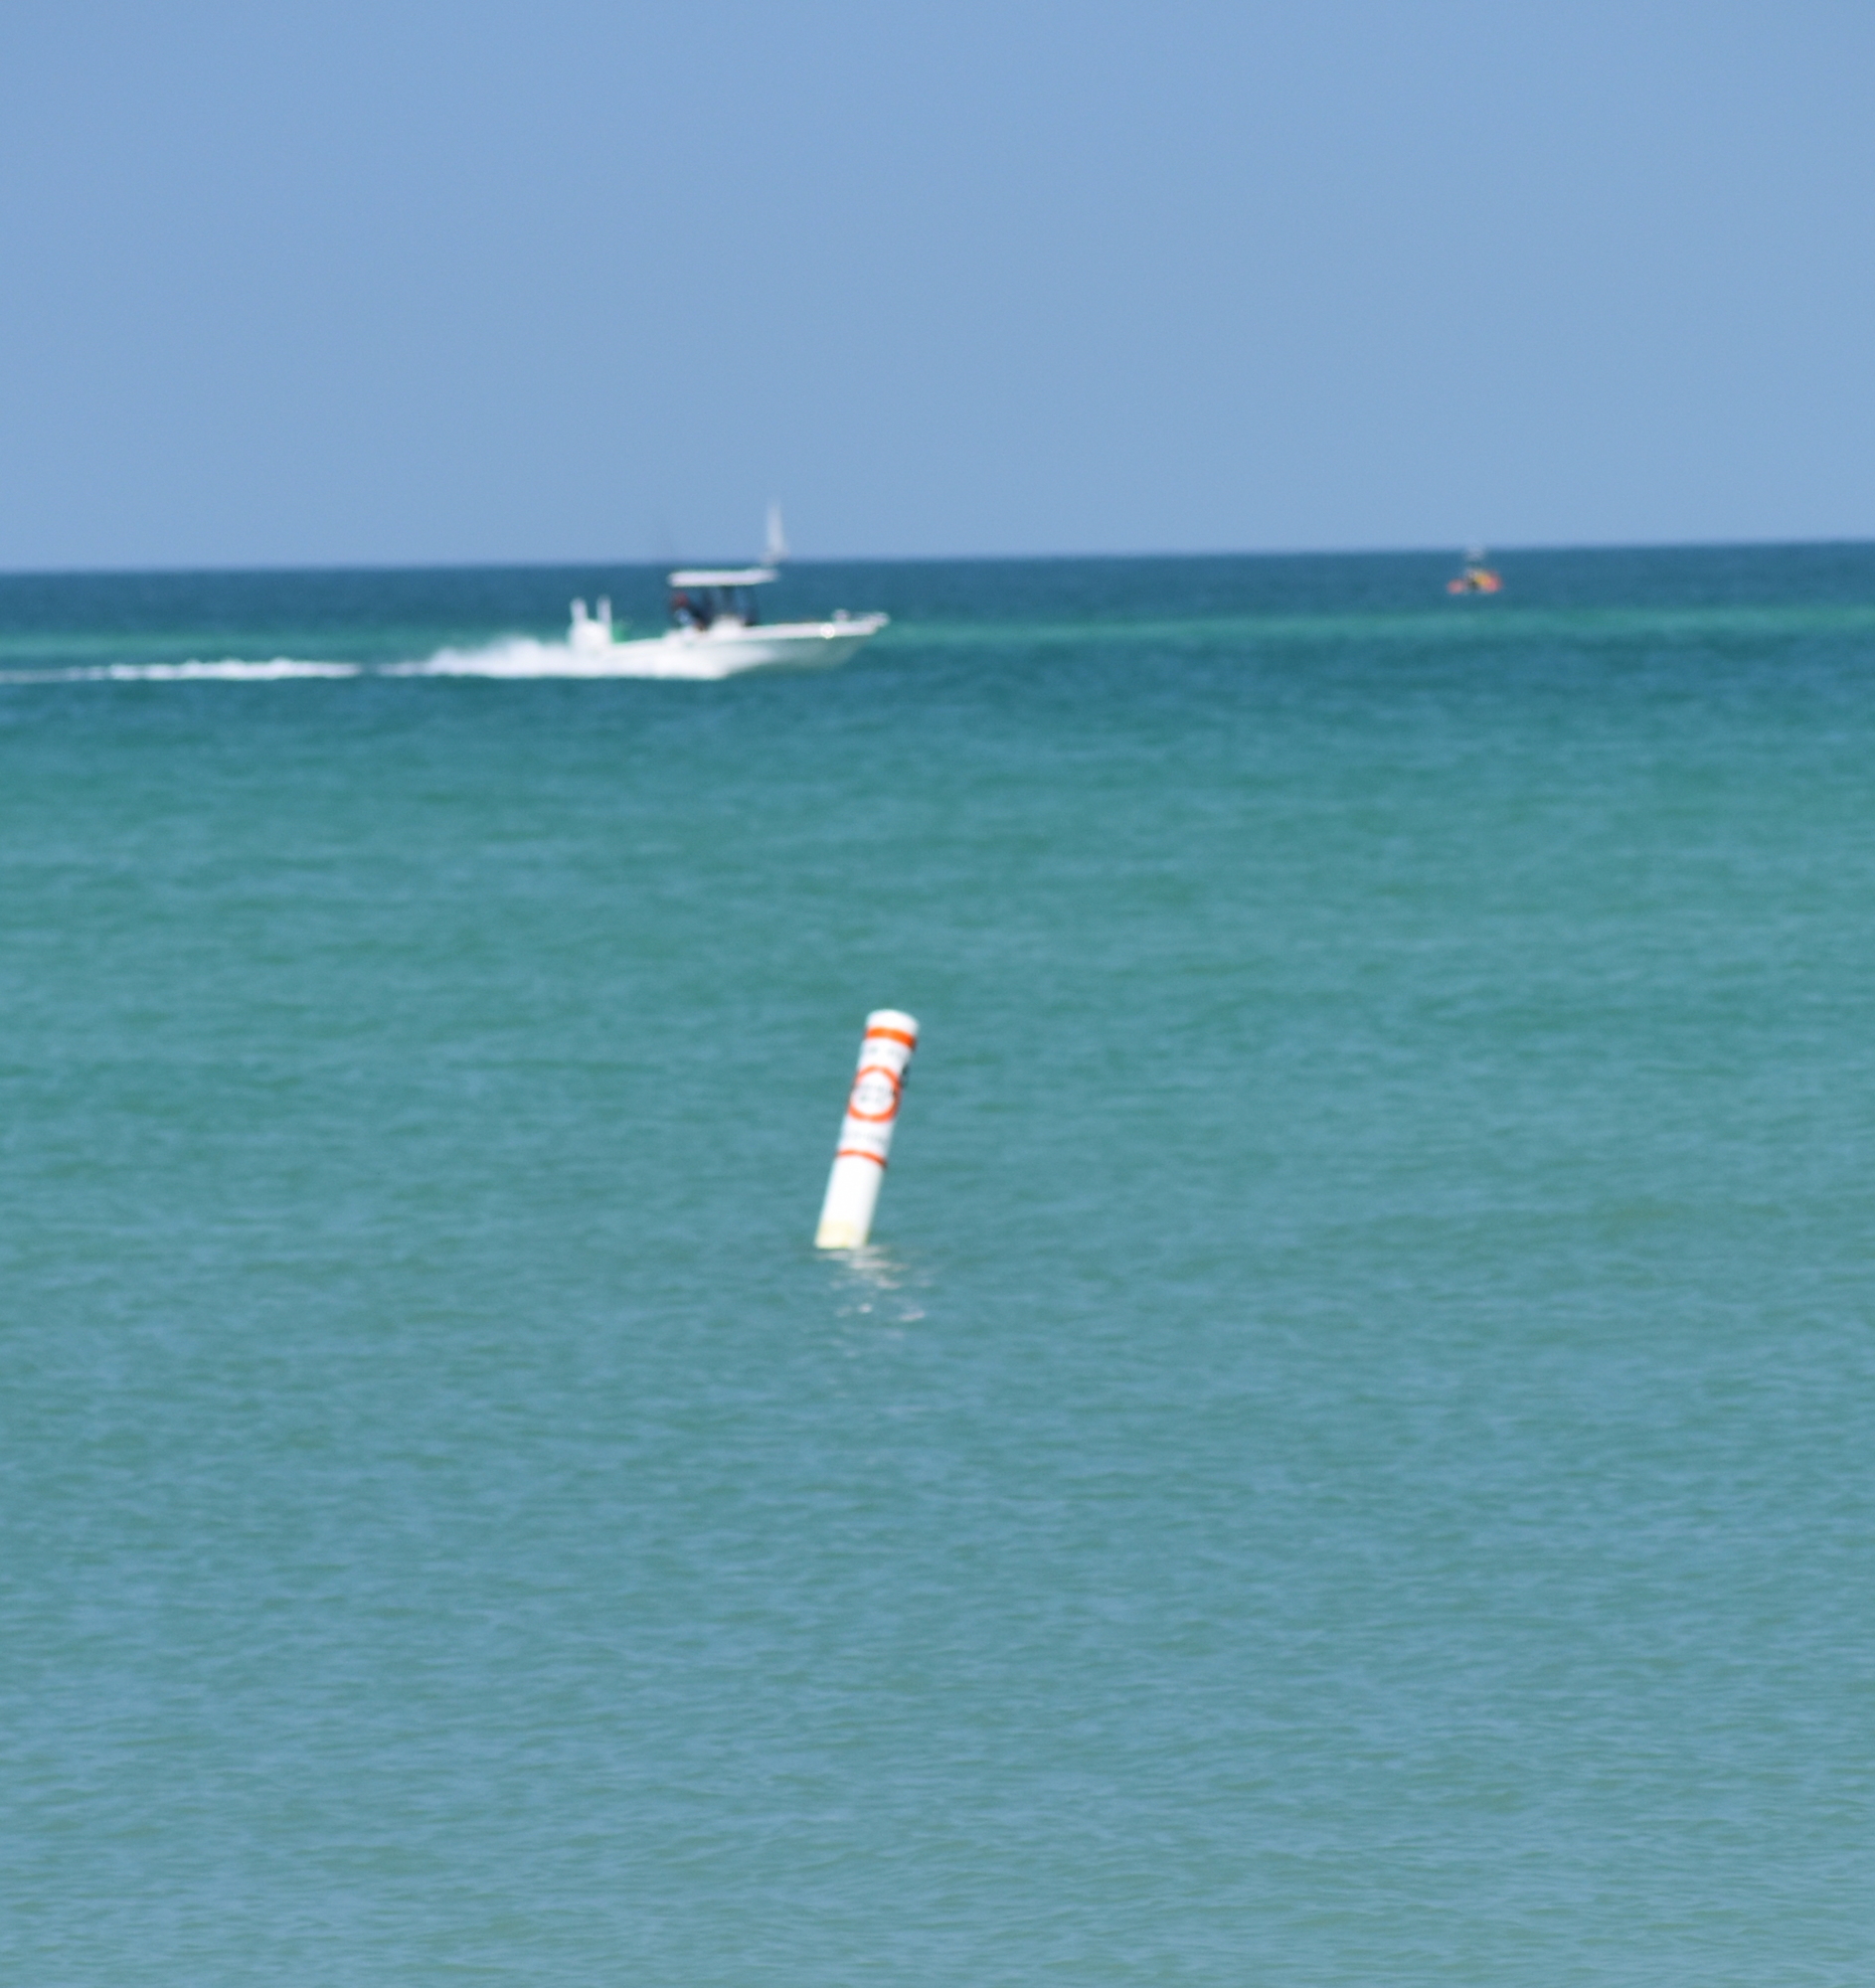 One speaker wanted to see more buoys restored along the beach to mark off safe boating zones. 